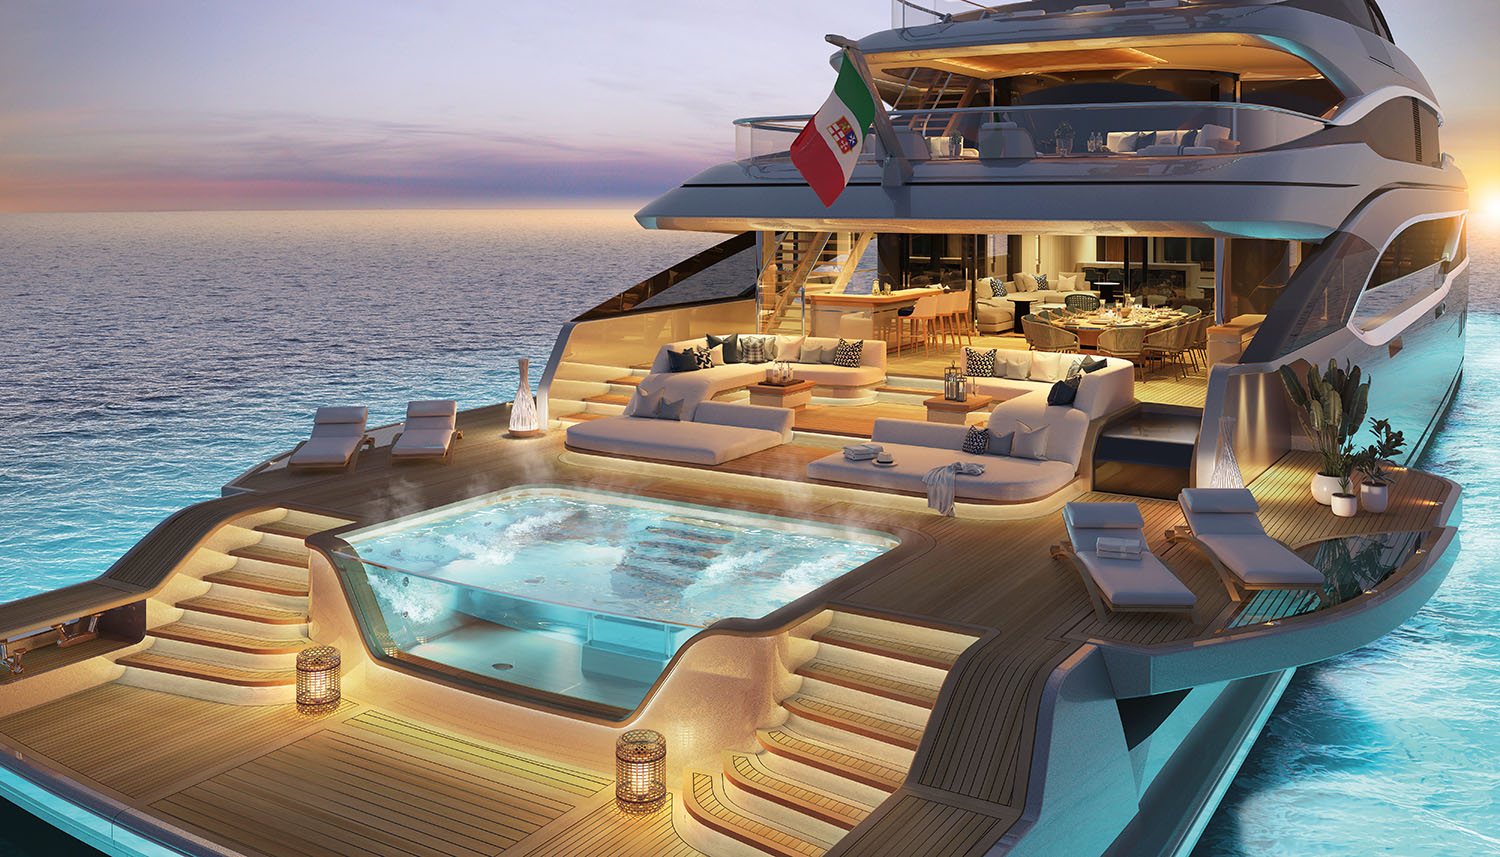 English The Benetti Oasis Deck™ Reshapes The Superyacht World By Creating A New Lifestyle